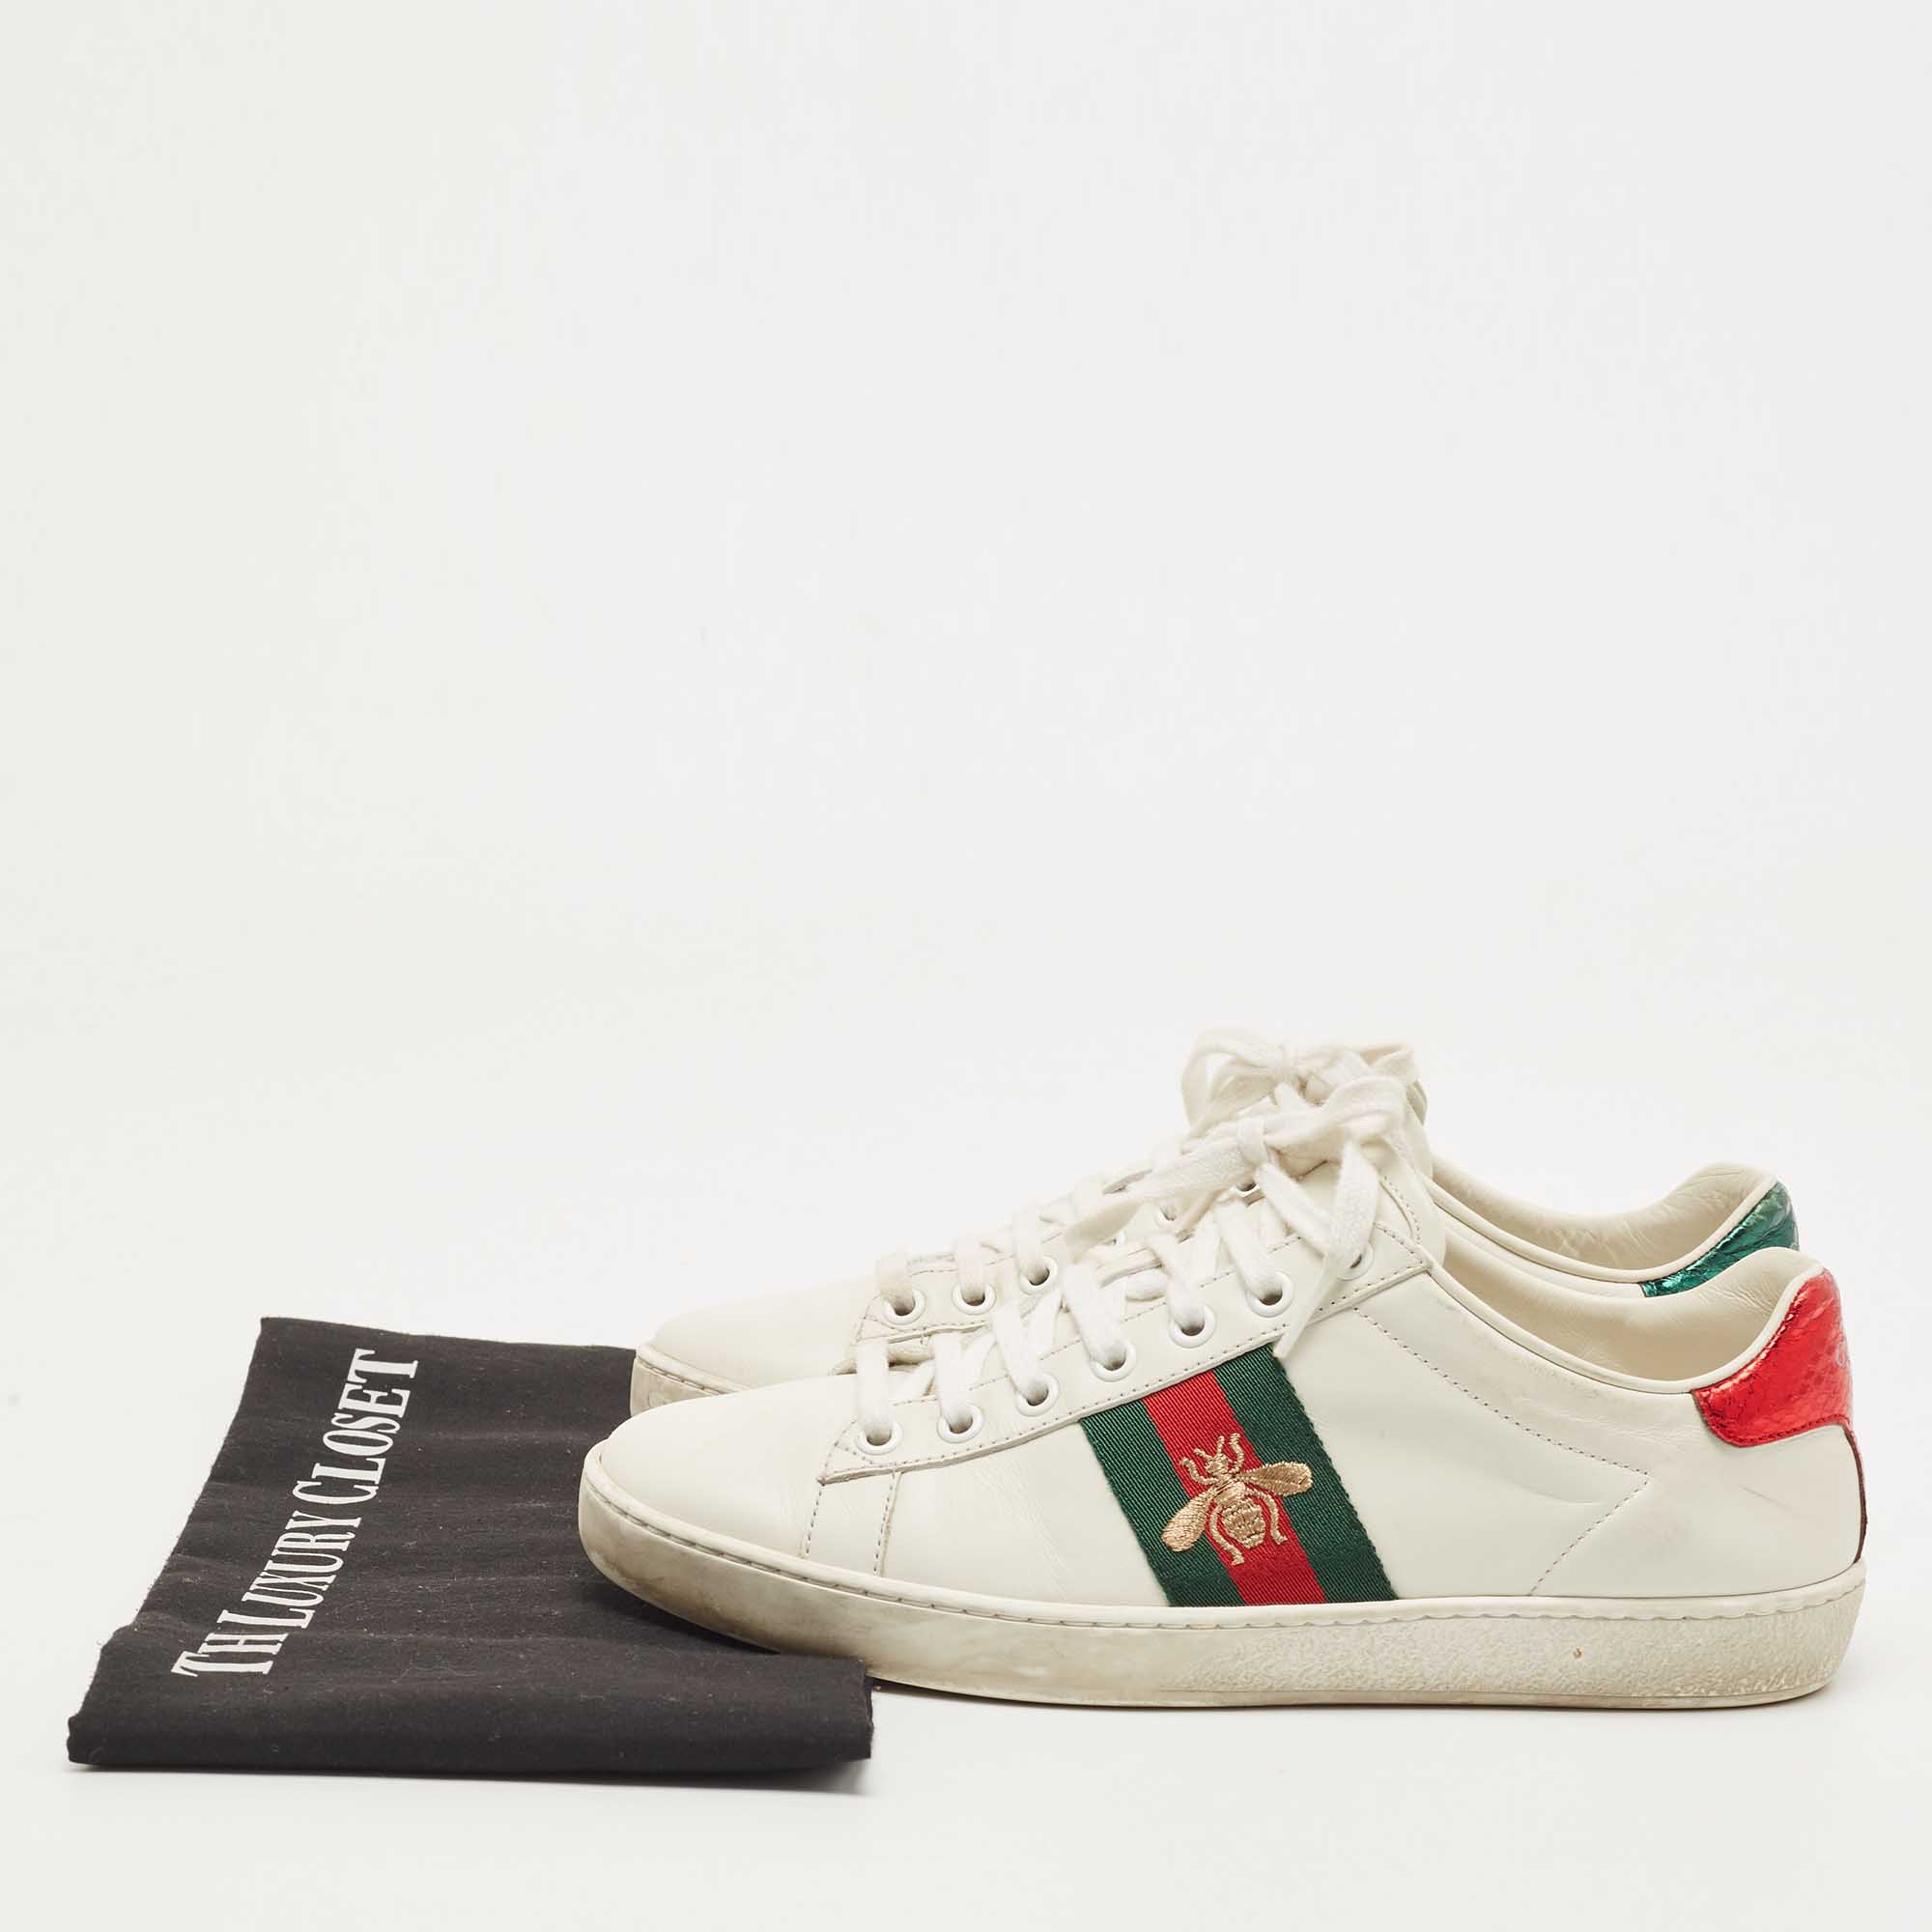 Gucci White Leather And Python Embossed Leather Ace Bee Web Low Top Sneakers Size 37